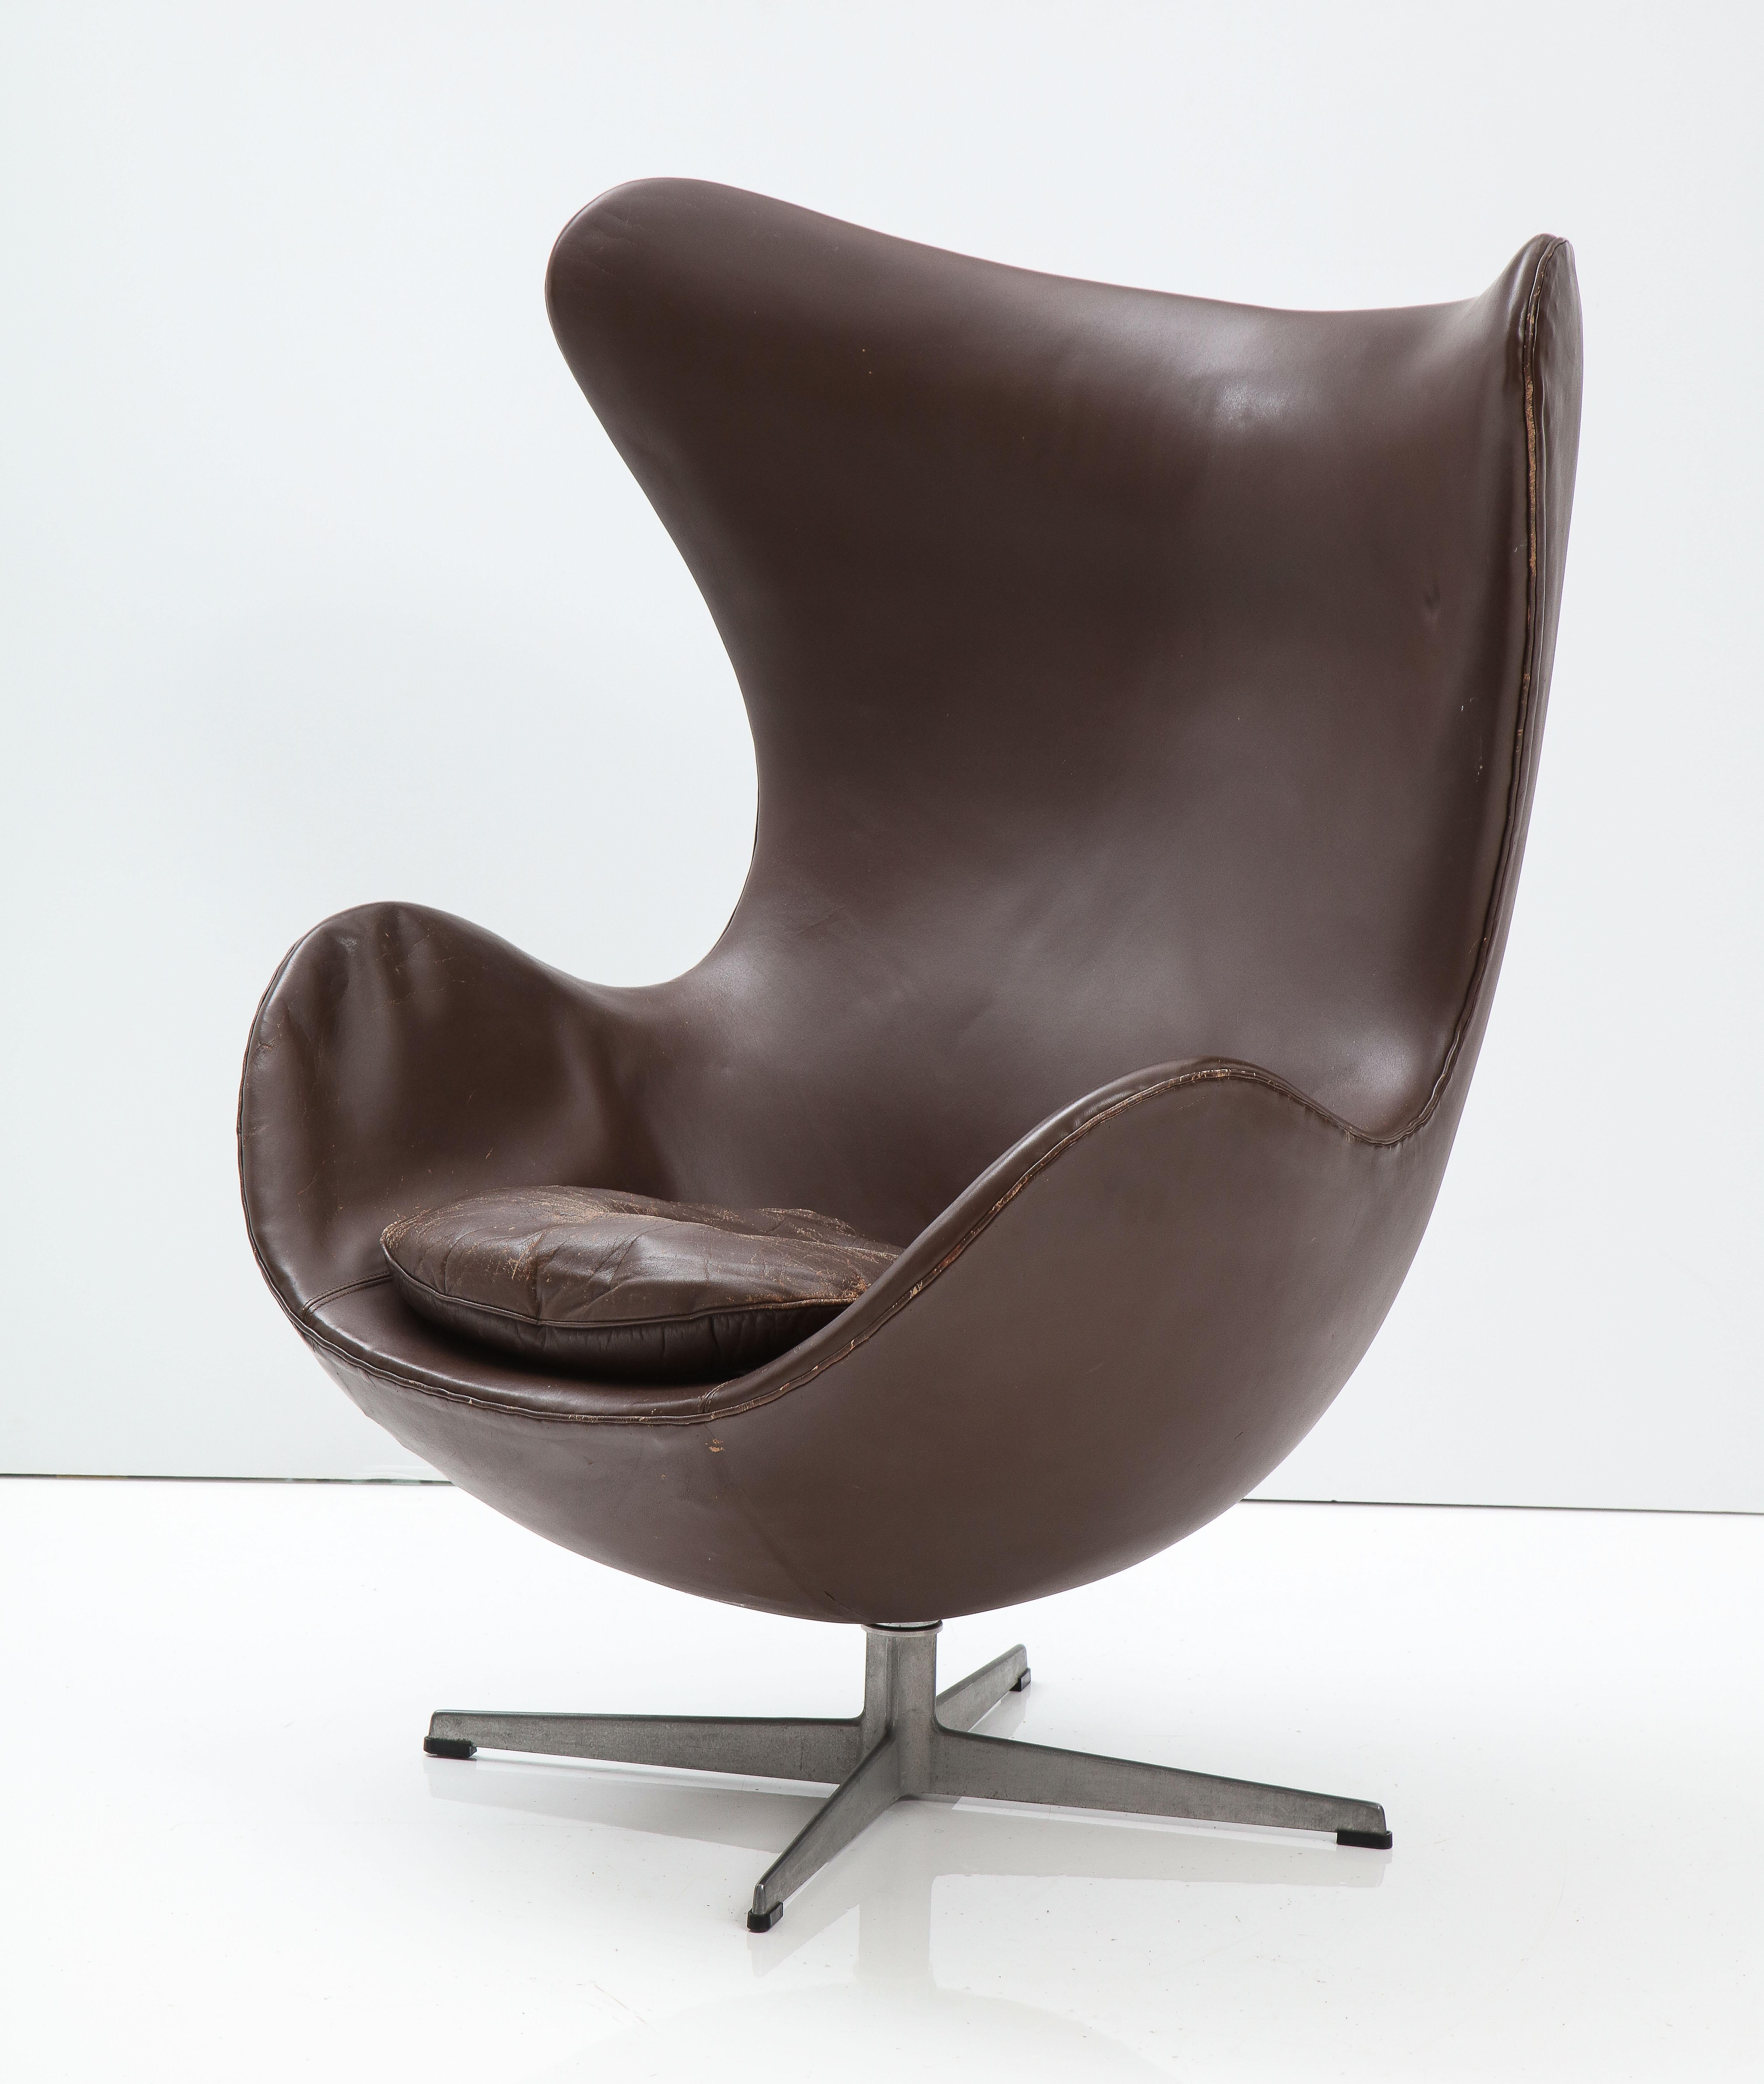 Arne Jacobson 'Egg' Chair and Ottoman, Original Leather for Fritz Hansen, 1976 For Sale 1